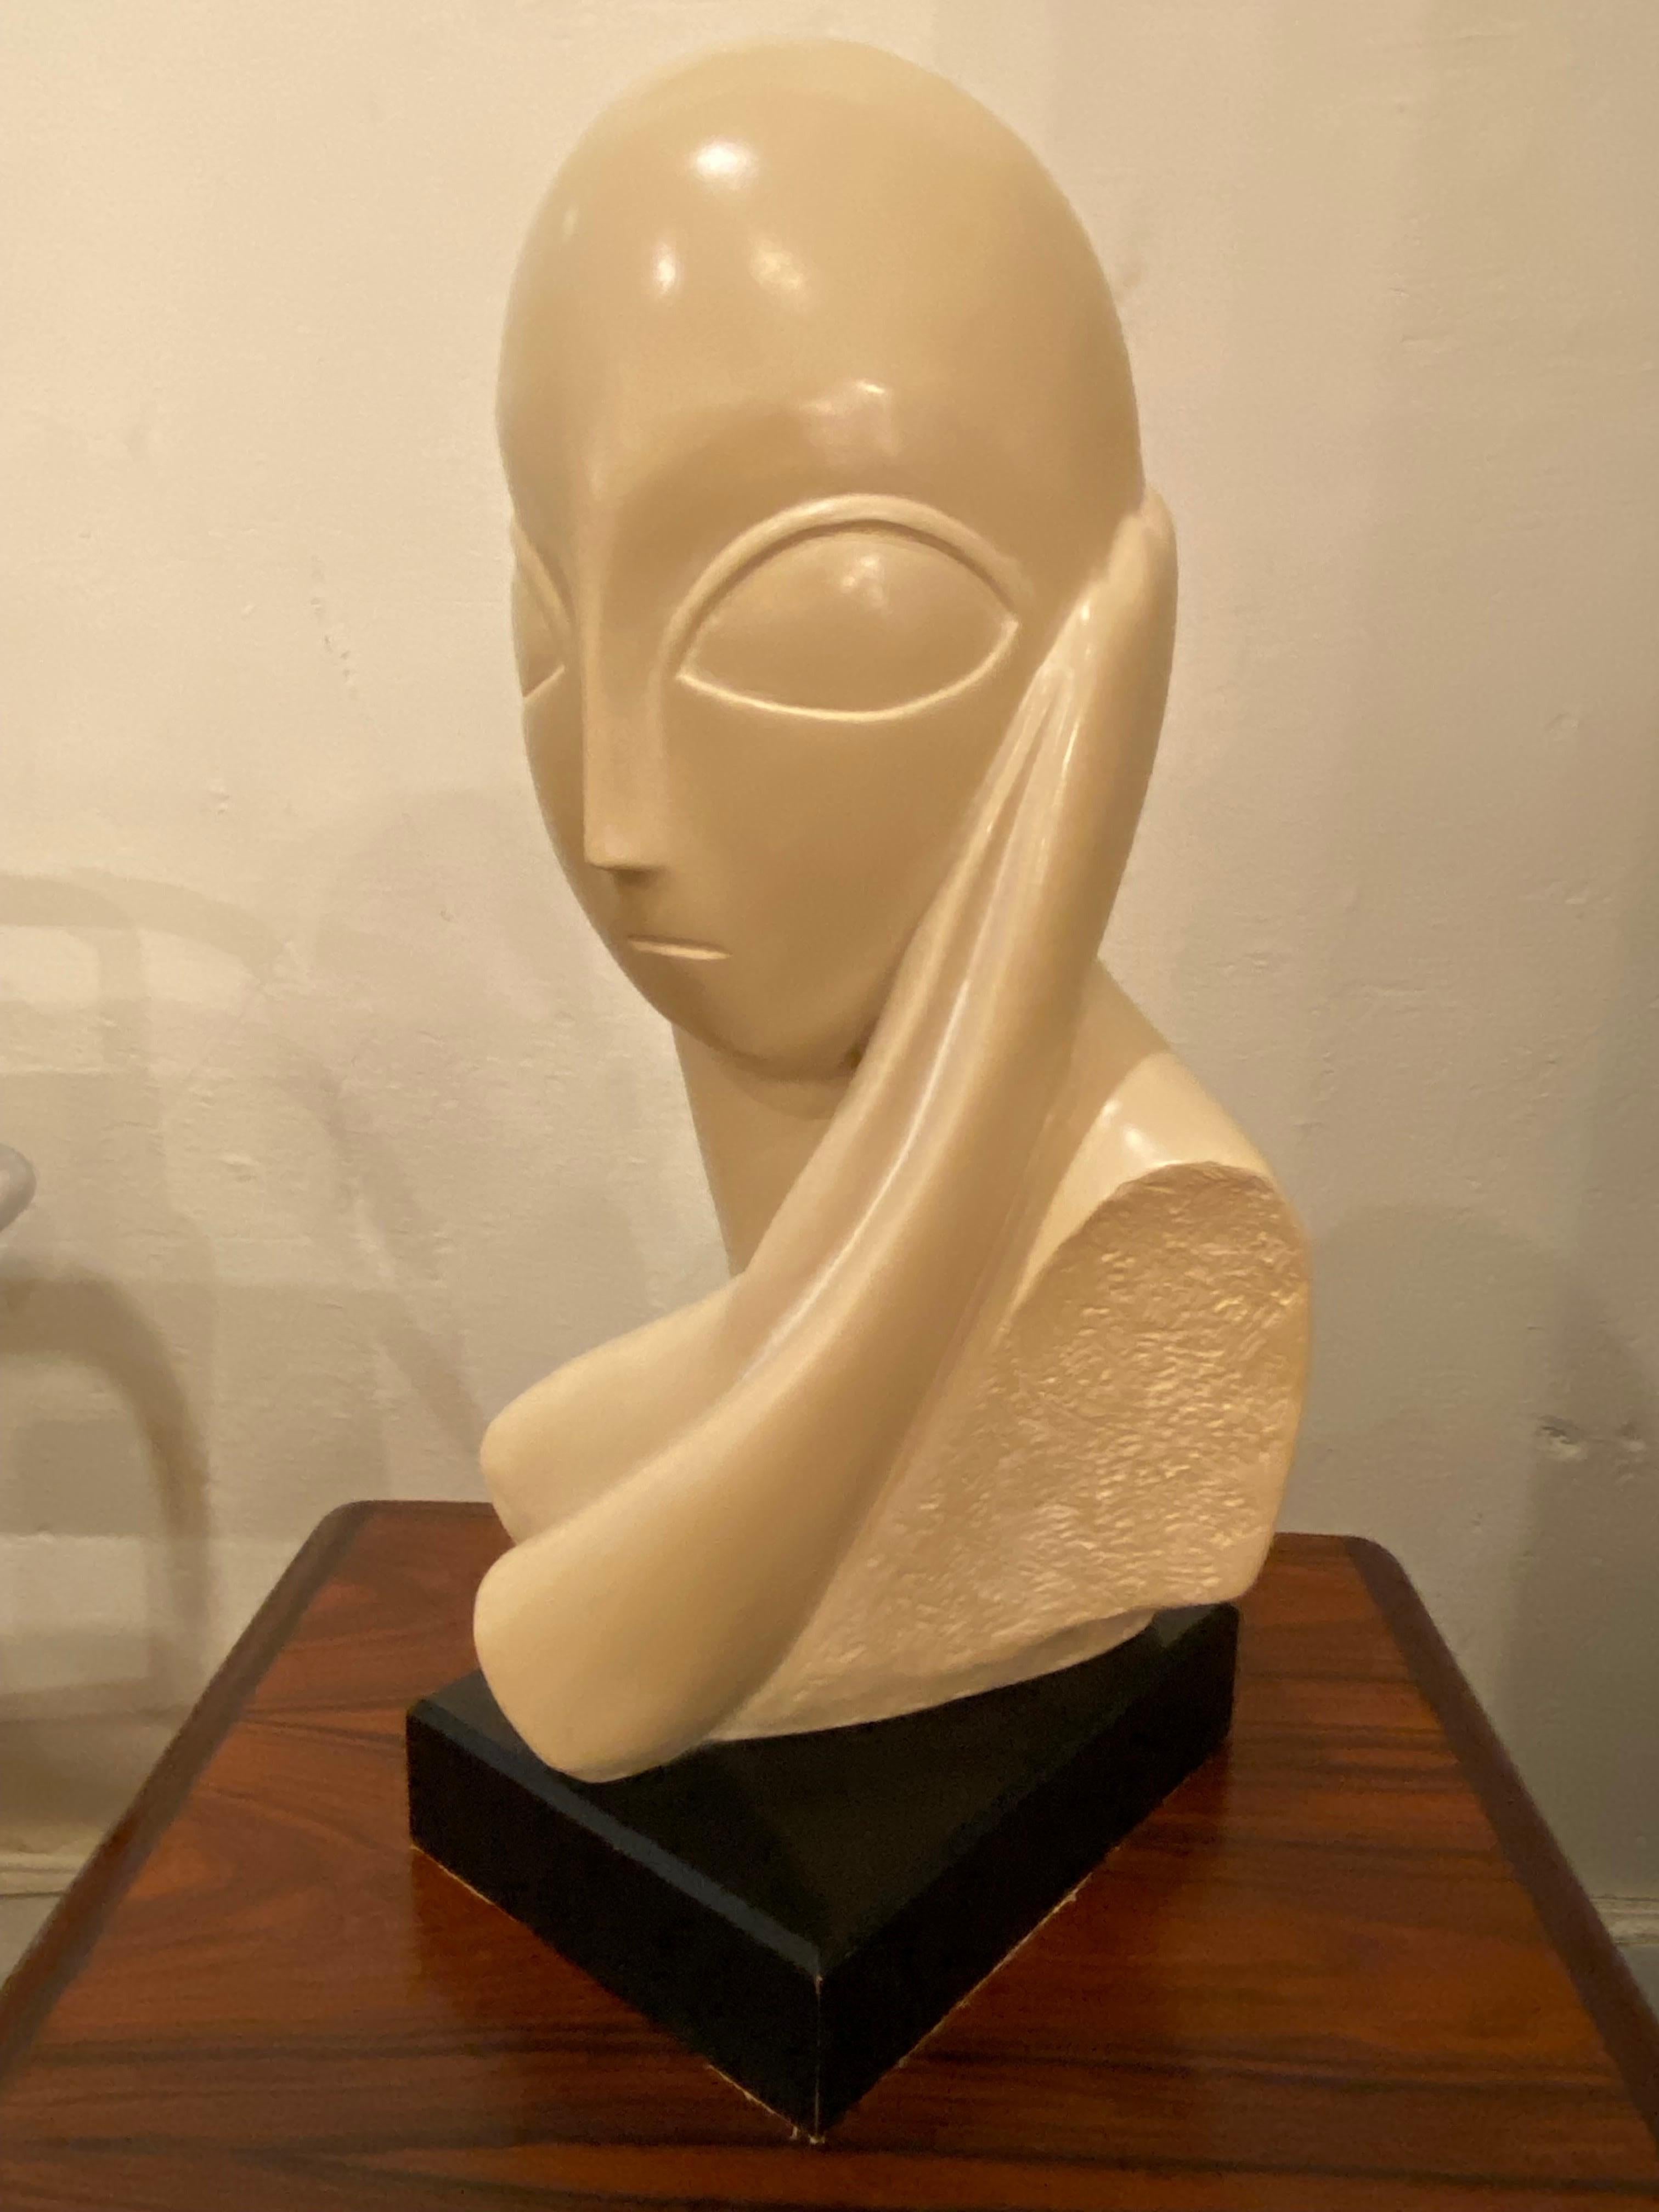 Austin Productions 1961 Abstract Sculpted Head. Signed to back. Sculpture sits on a wood base. Dramatic Piece, nice size and scale!.